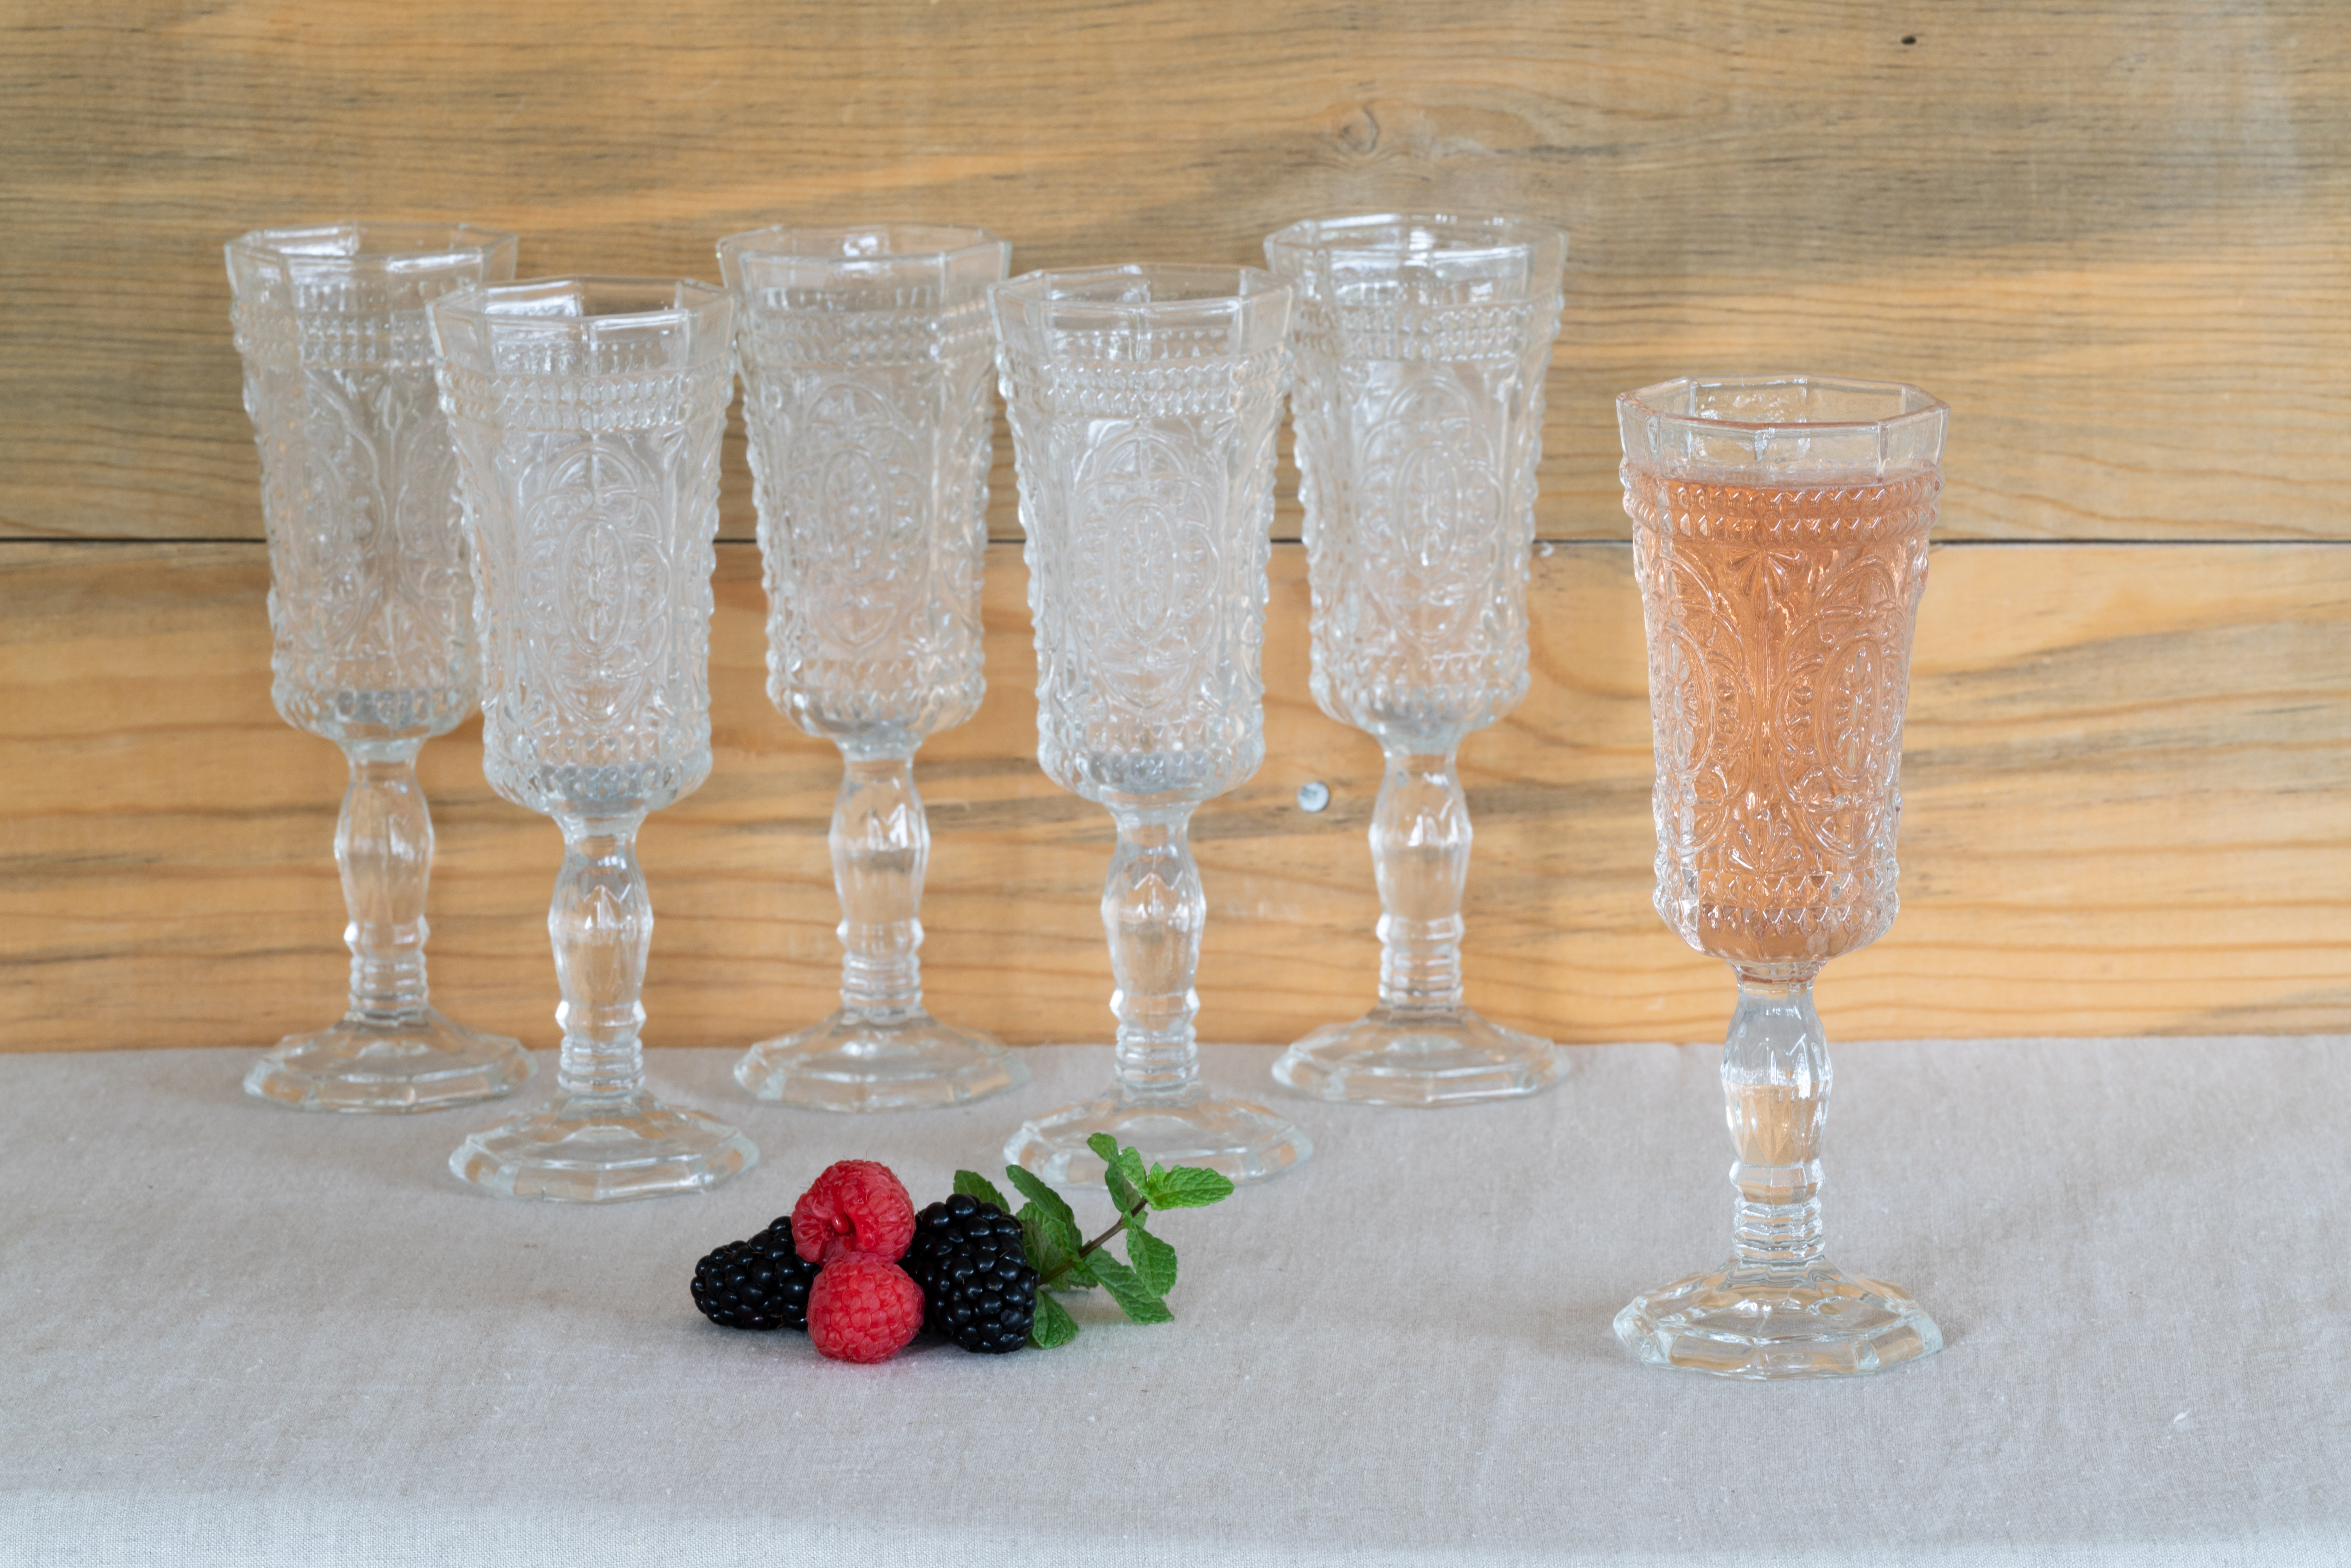 Orleans Romanian Crystal Flute Champagne Glasses, Set of 4